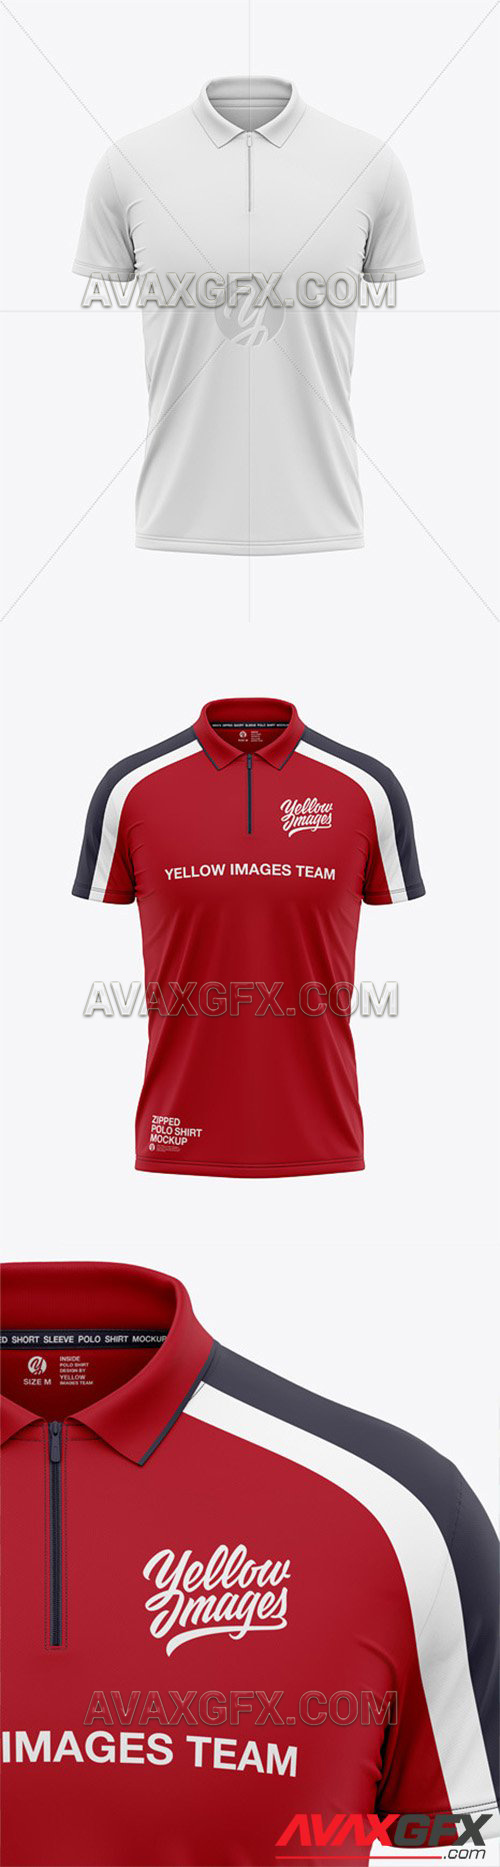 Download Men's Zip Neck Polo Shirts Mockup 58403 » AVAXGFX - All Downloads that You Need in One Place ...